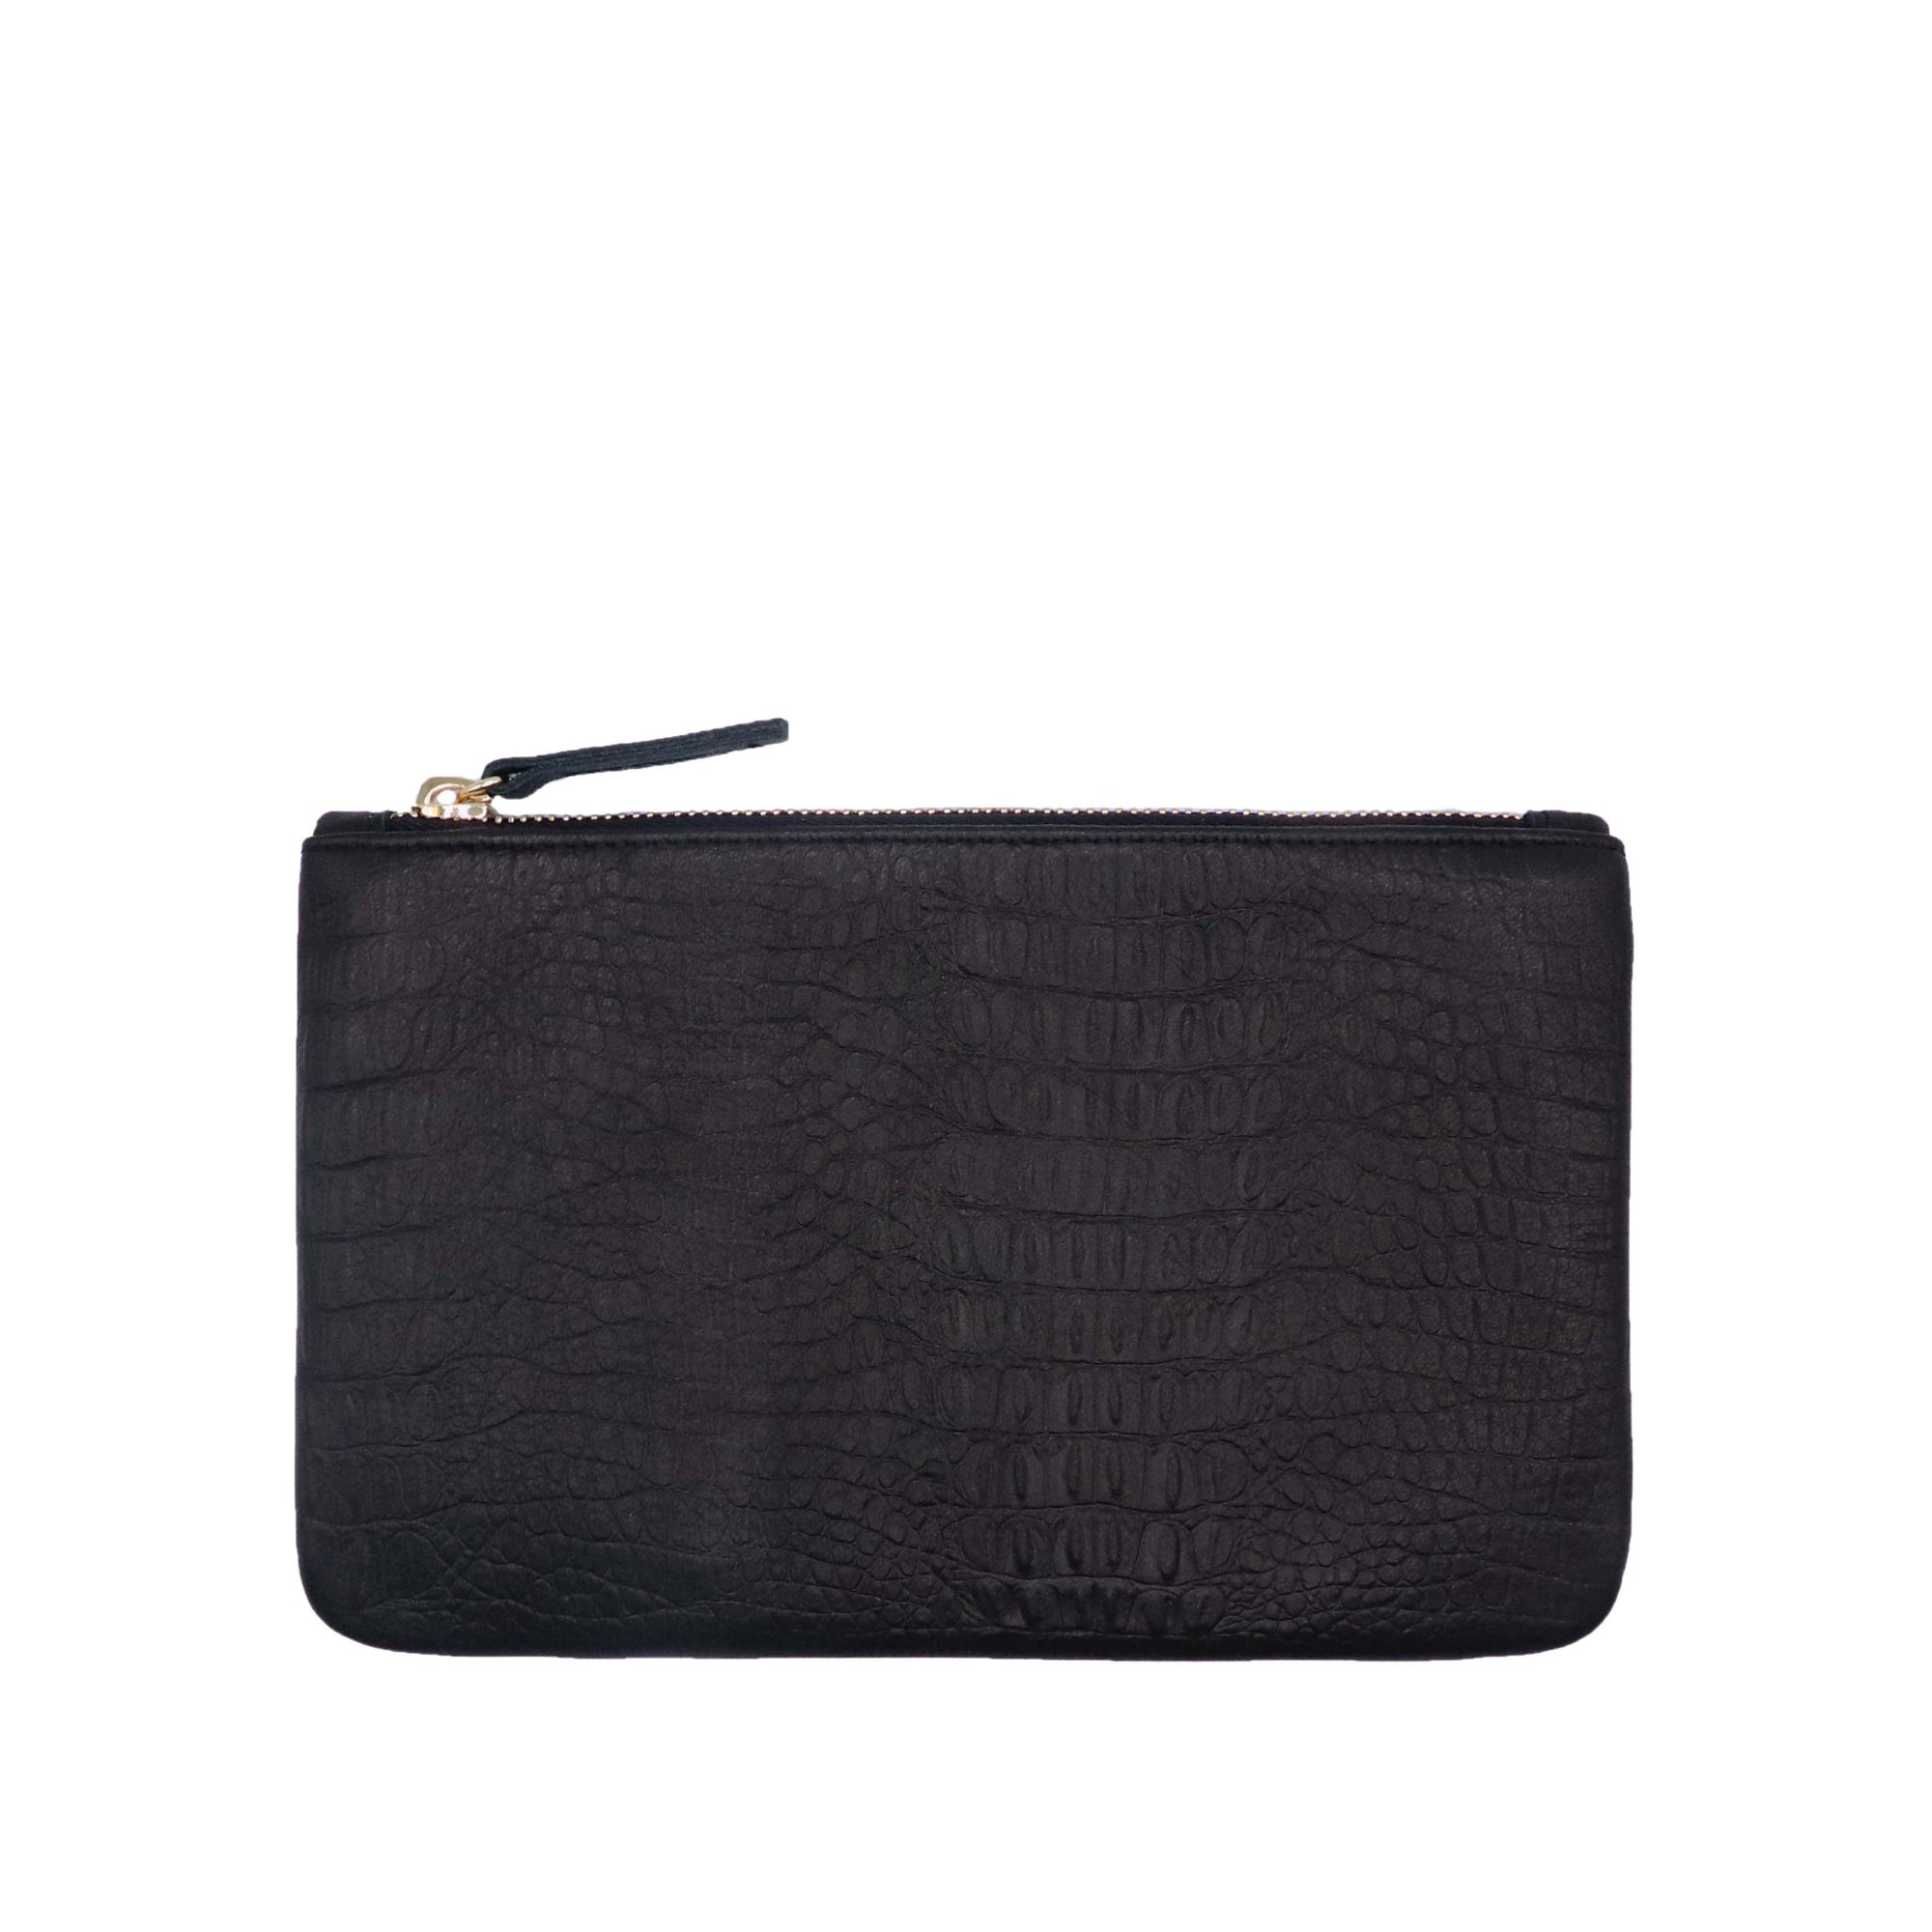 Sonoma Pouch - Embossed Croc